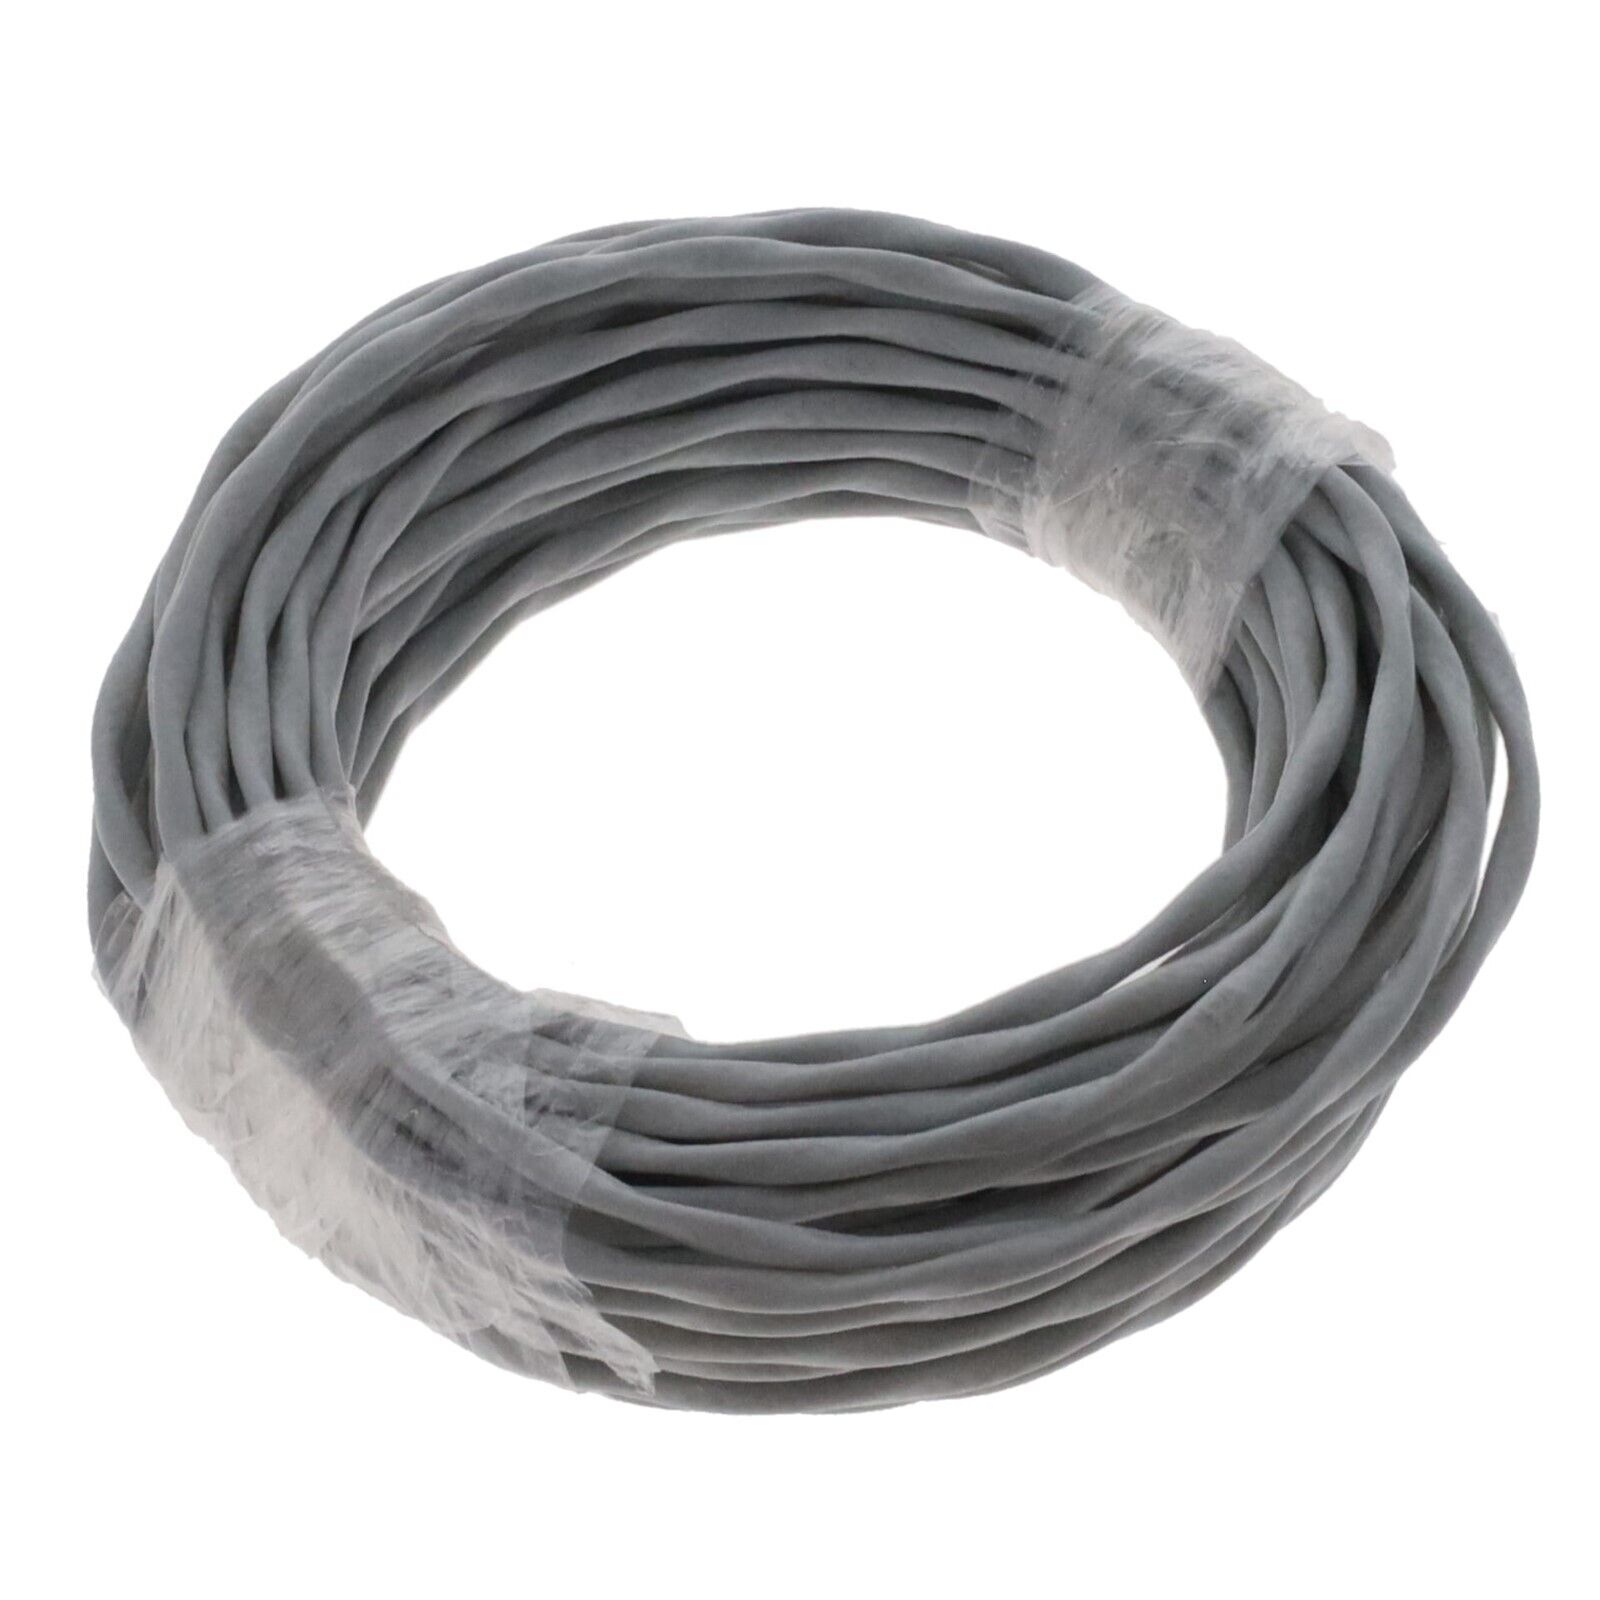 New Aircraft Grade Wire P/N M27500-18TG2T14 - 42 Ft Roll